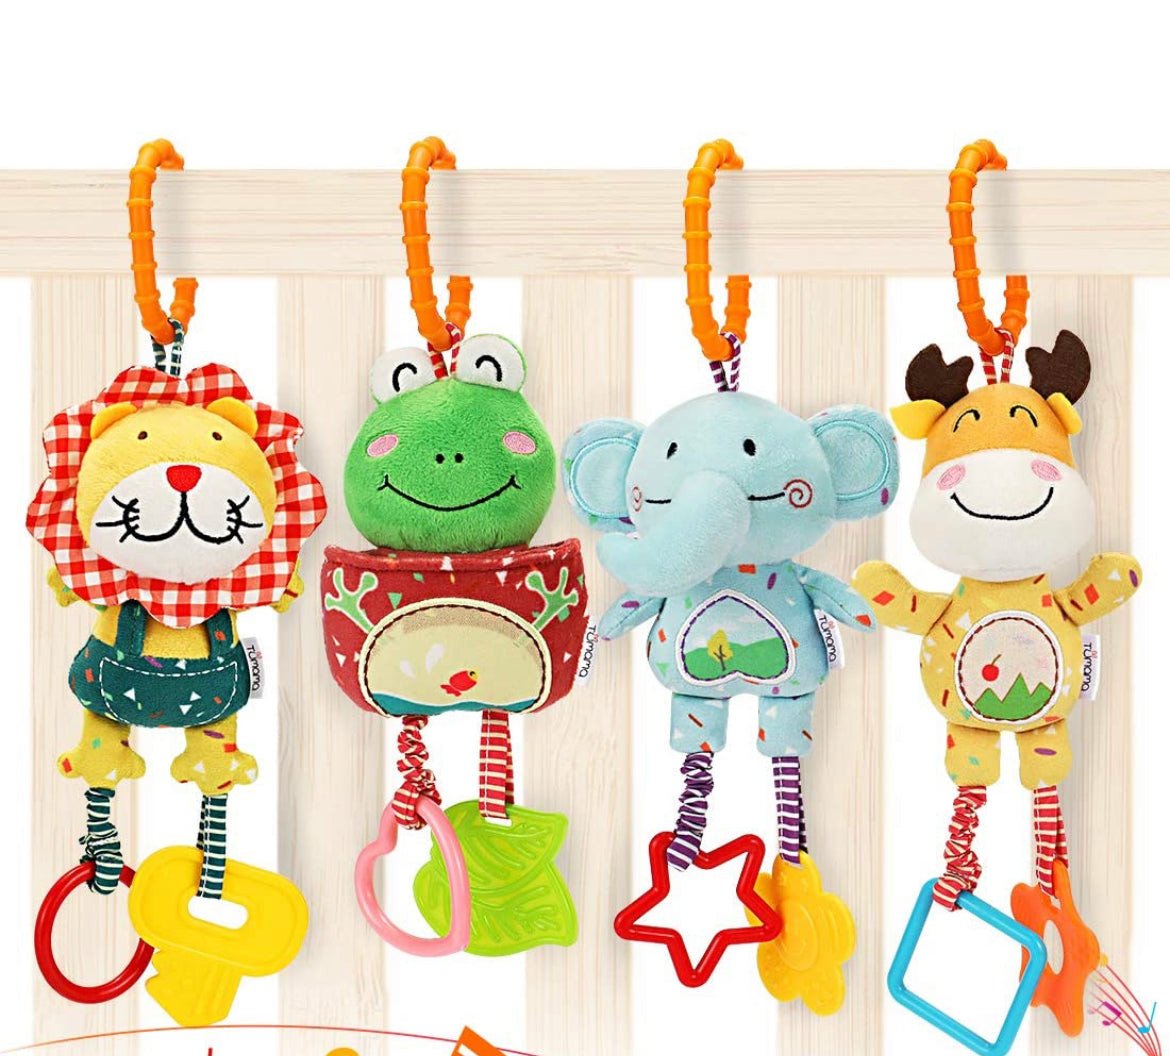 TUMAMA Baby Toys for 0, 3, 6, 9, 12 Months, Handbells Baby Rattles, Soft Plush Early Development Stroller Car Toys for Infant, 4 Pack.